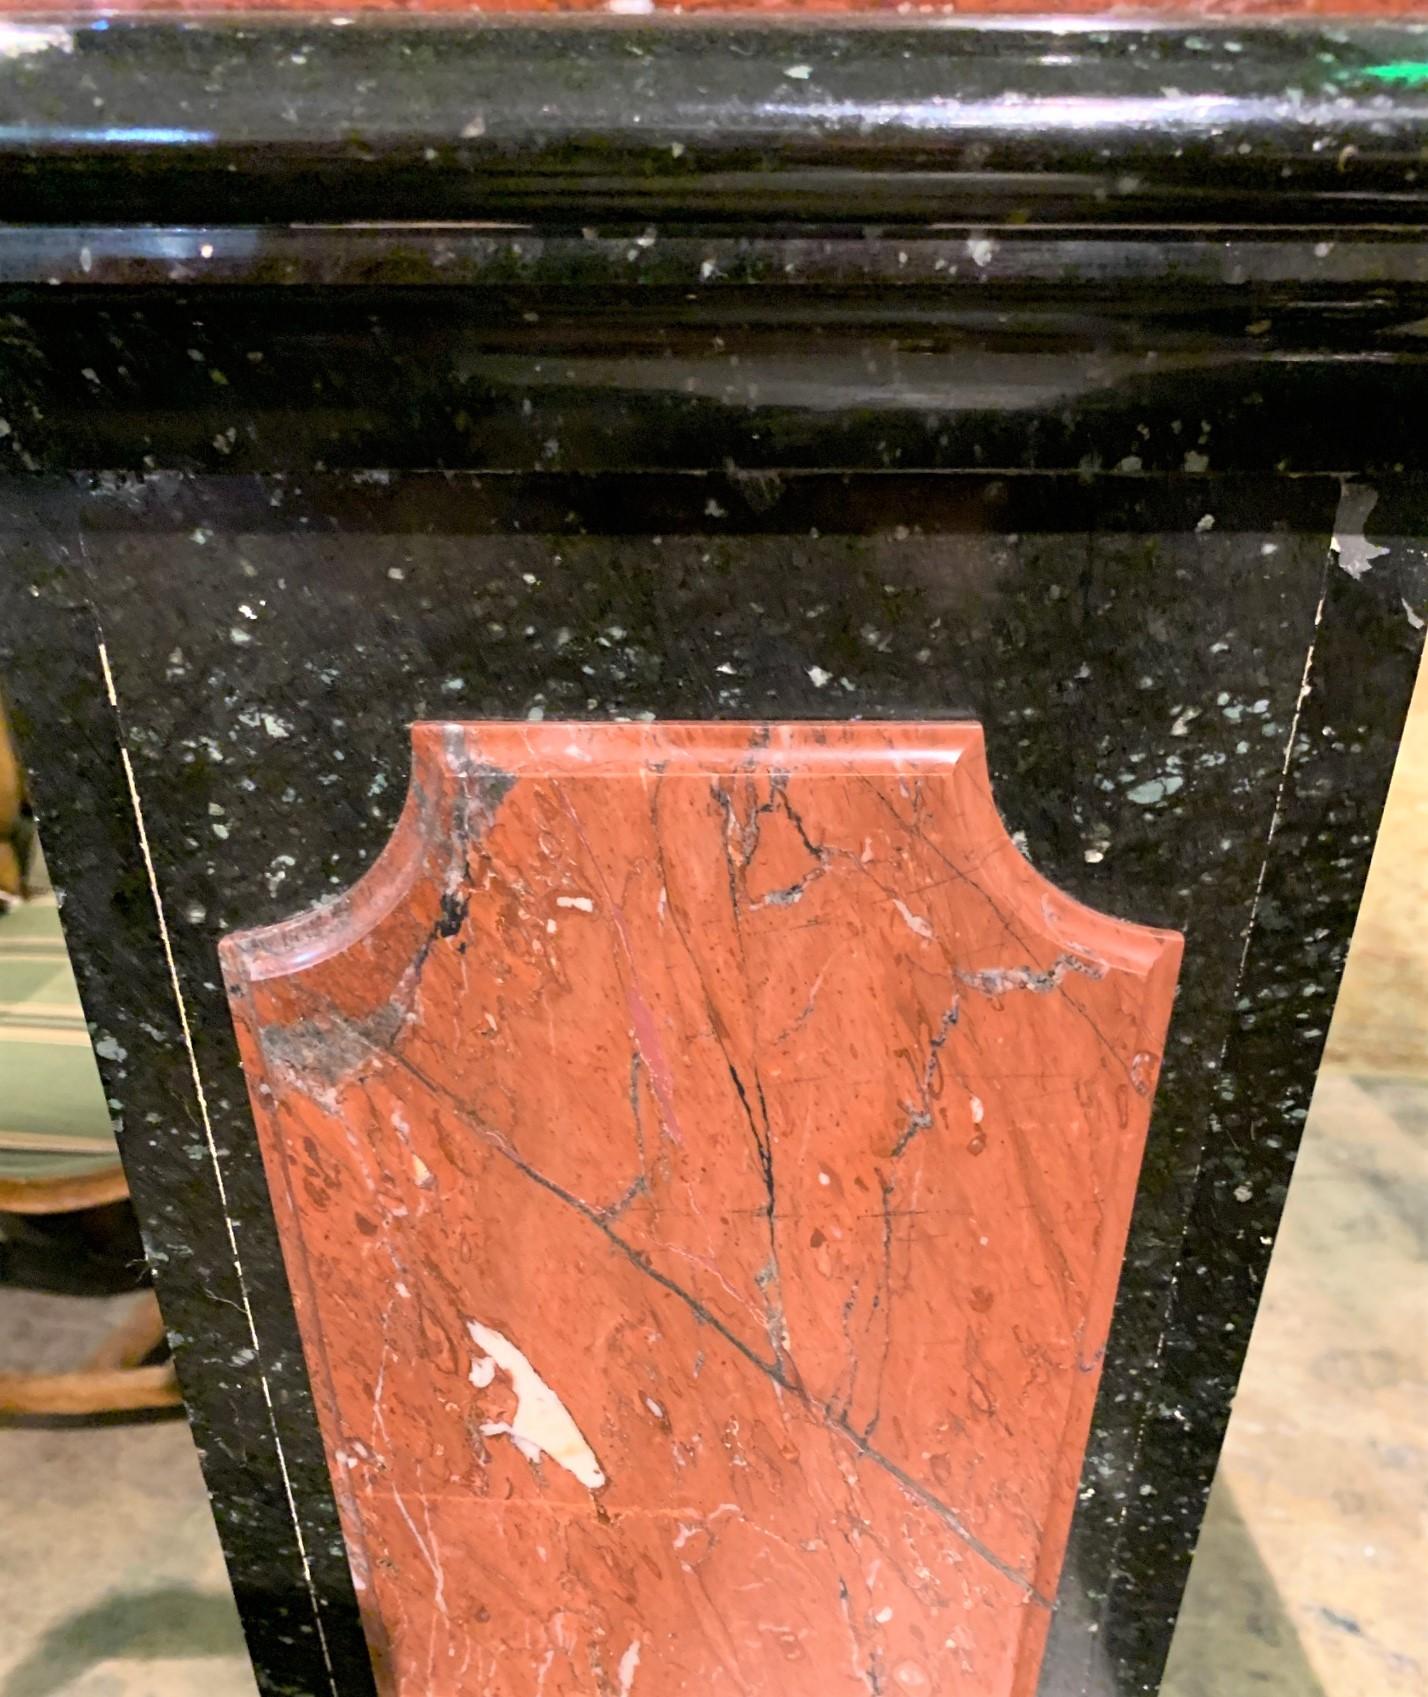 Fabulous pair of early 20th century French tapered pedestals in colors of speckled ebony and rouge red, circa 1920. 10 x 10 tops, midsections are 13 x 13, and bases are 13 x 13, 50.5 high.